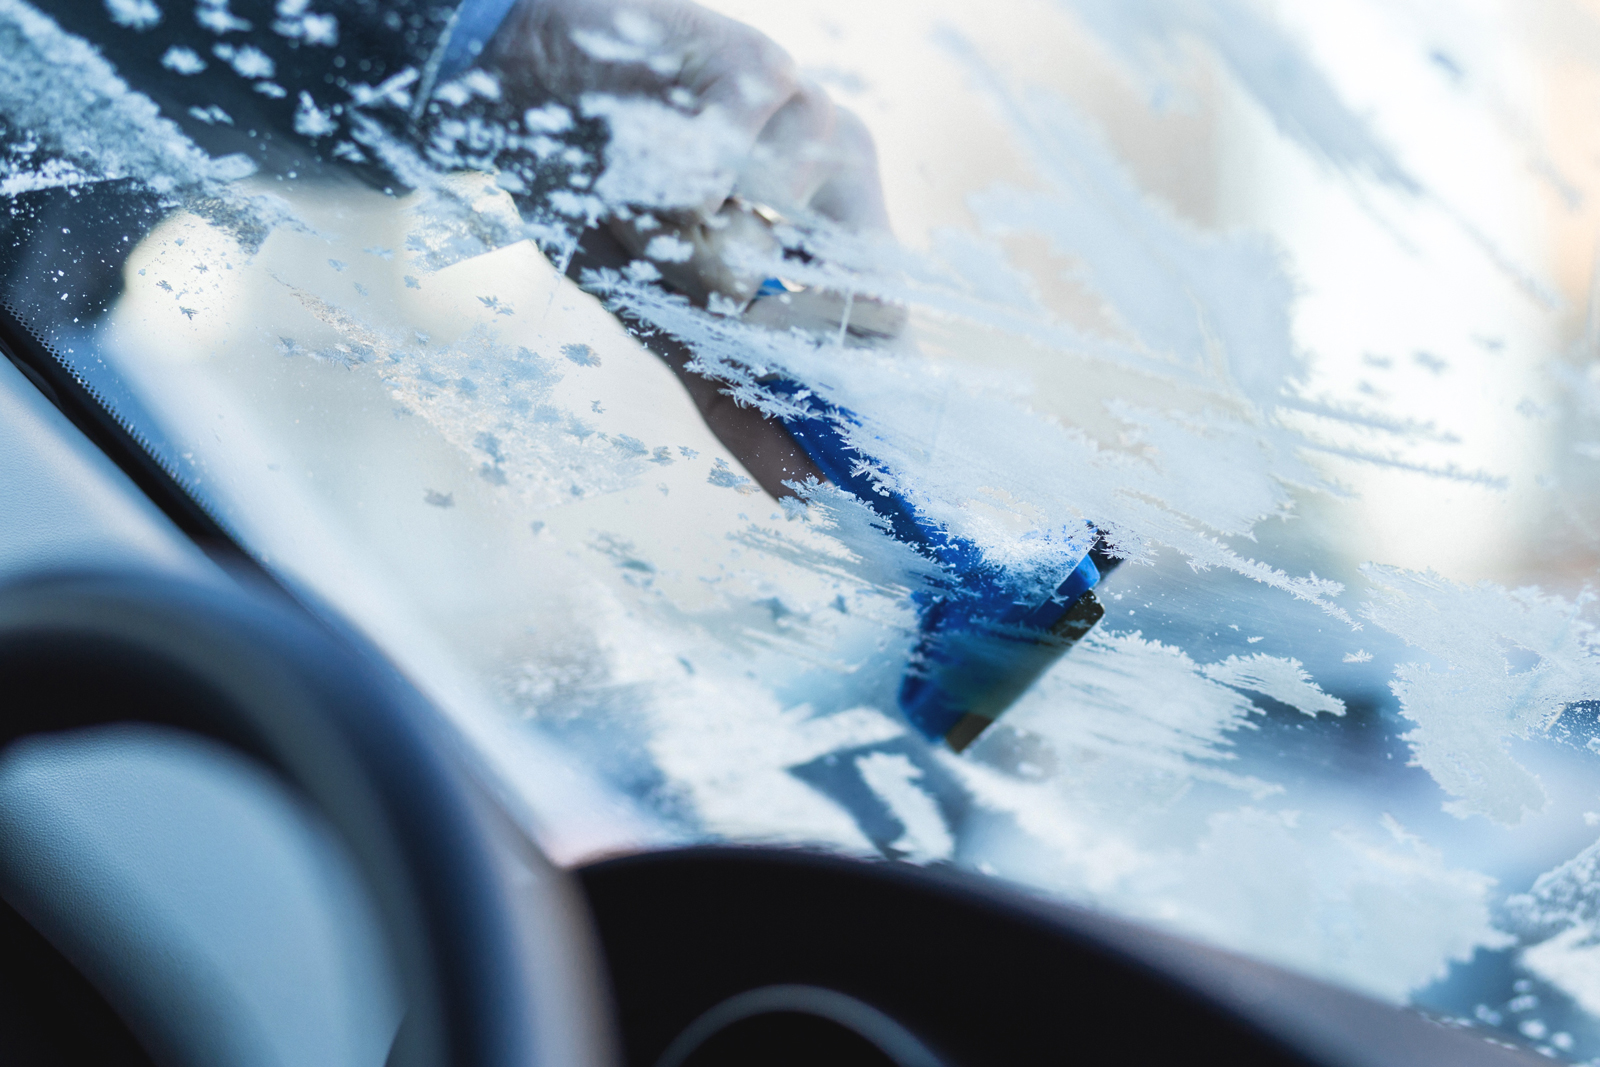 A view of a frozen over windscreen from inside the car